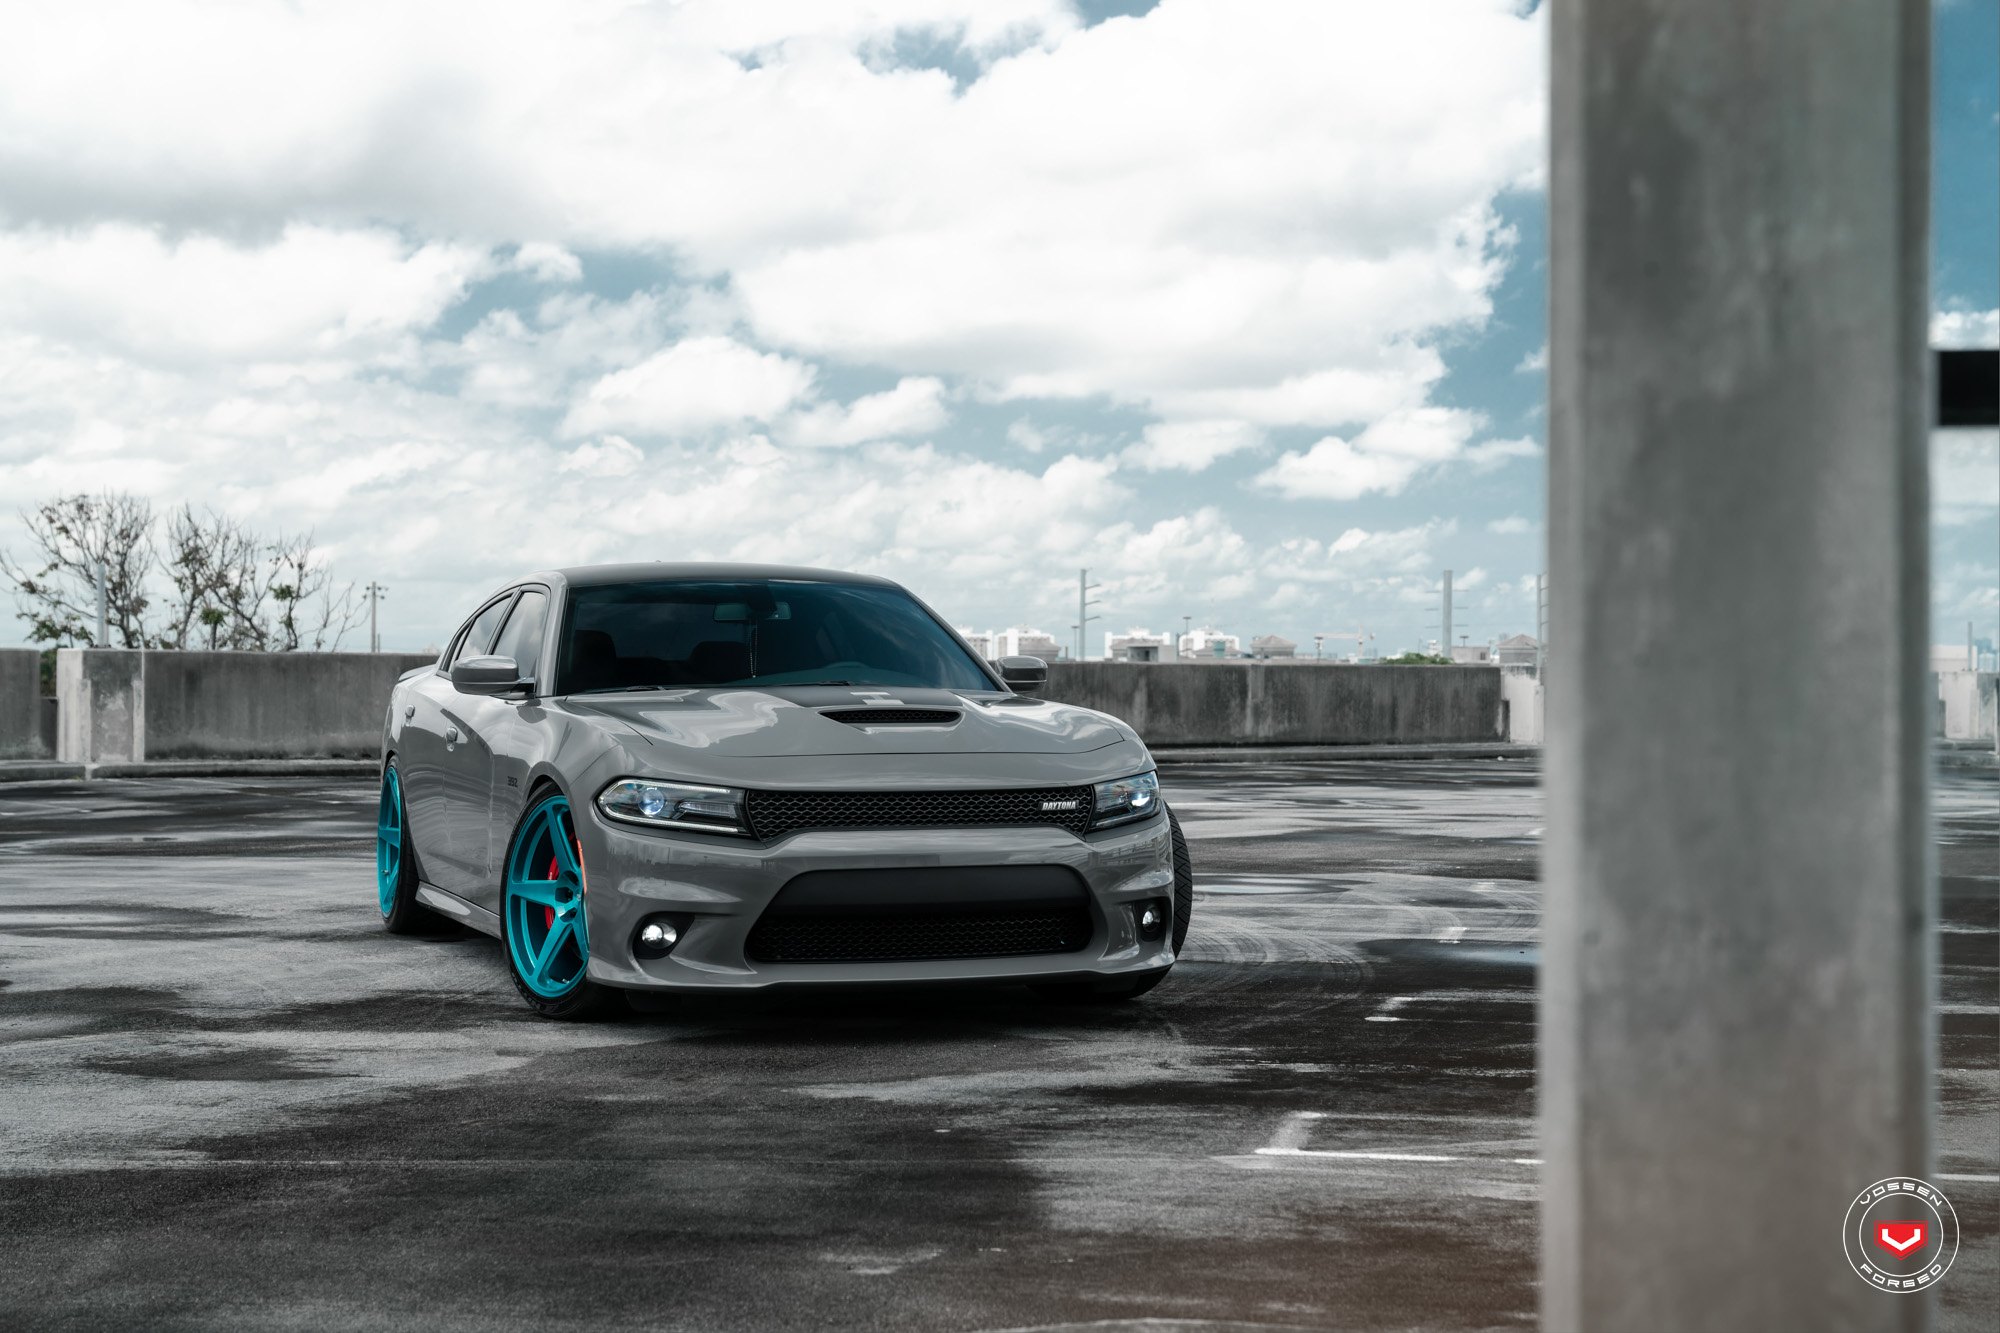 Gray Dodge Charger Daytona with Custom Vented Hood - Photo by Vossen